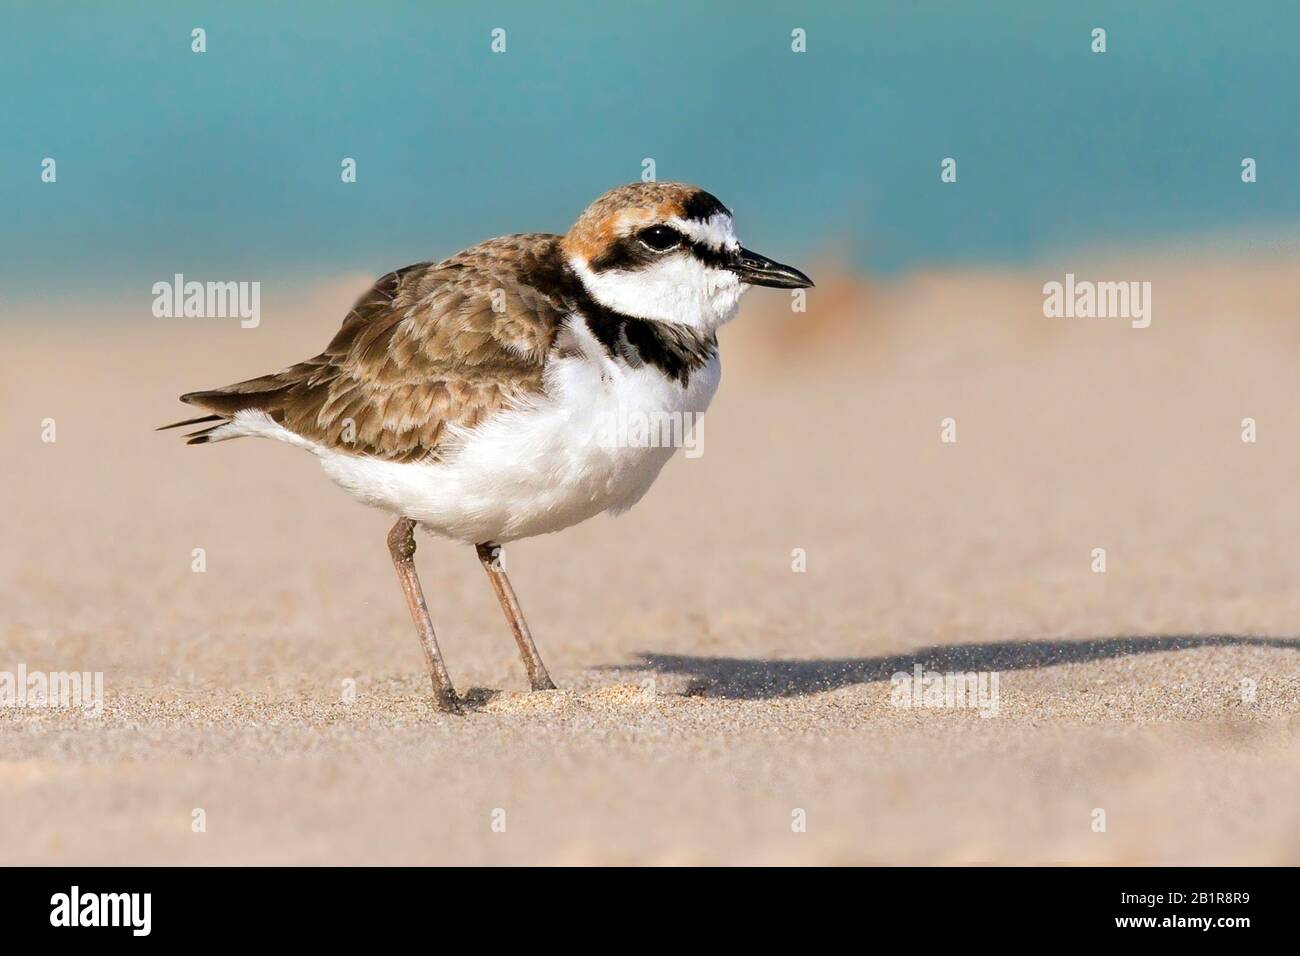 Malaysian sand plover (Charadrius peronii), standing on a beach, Asia Stock Photo